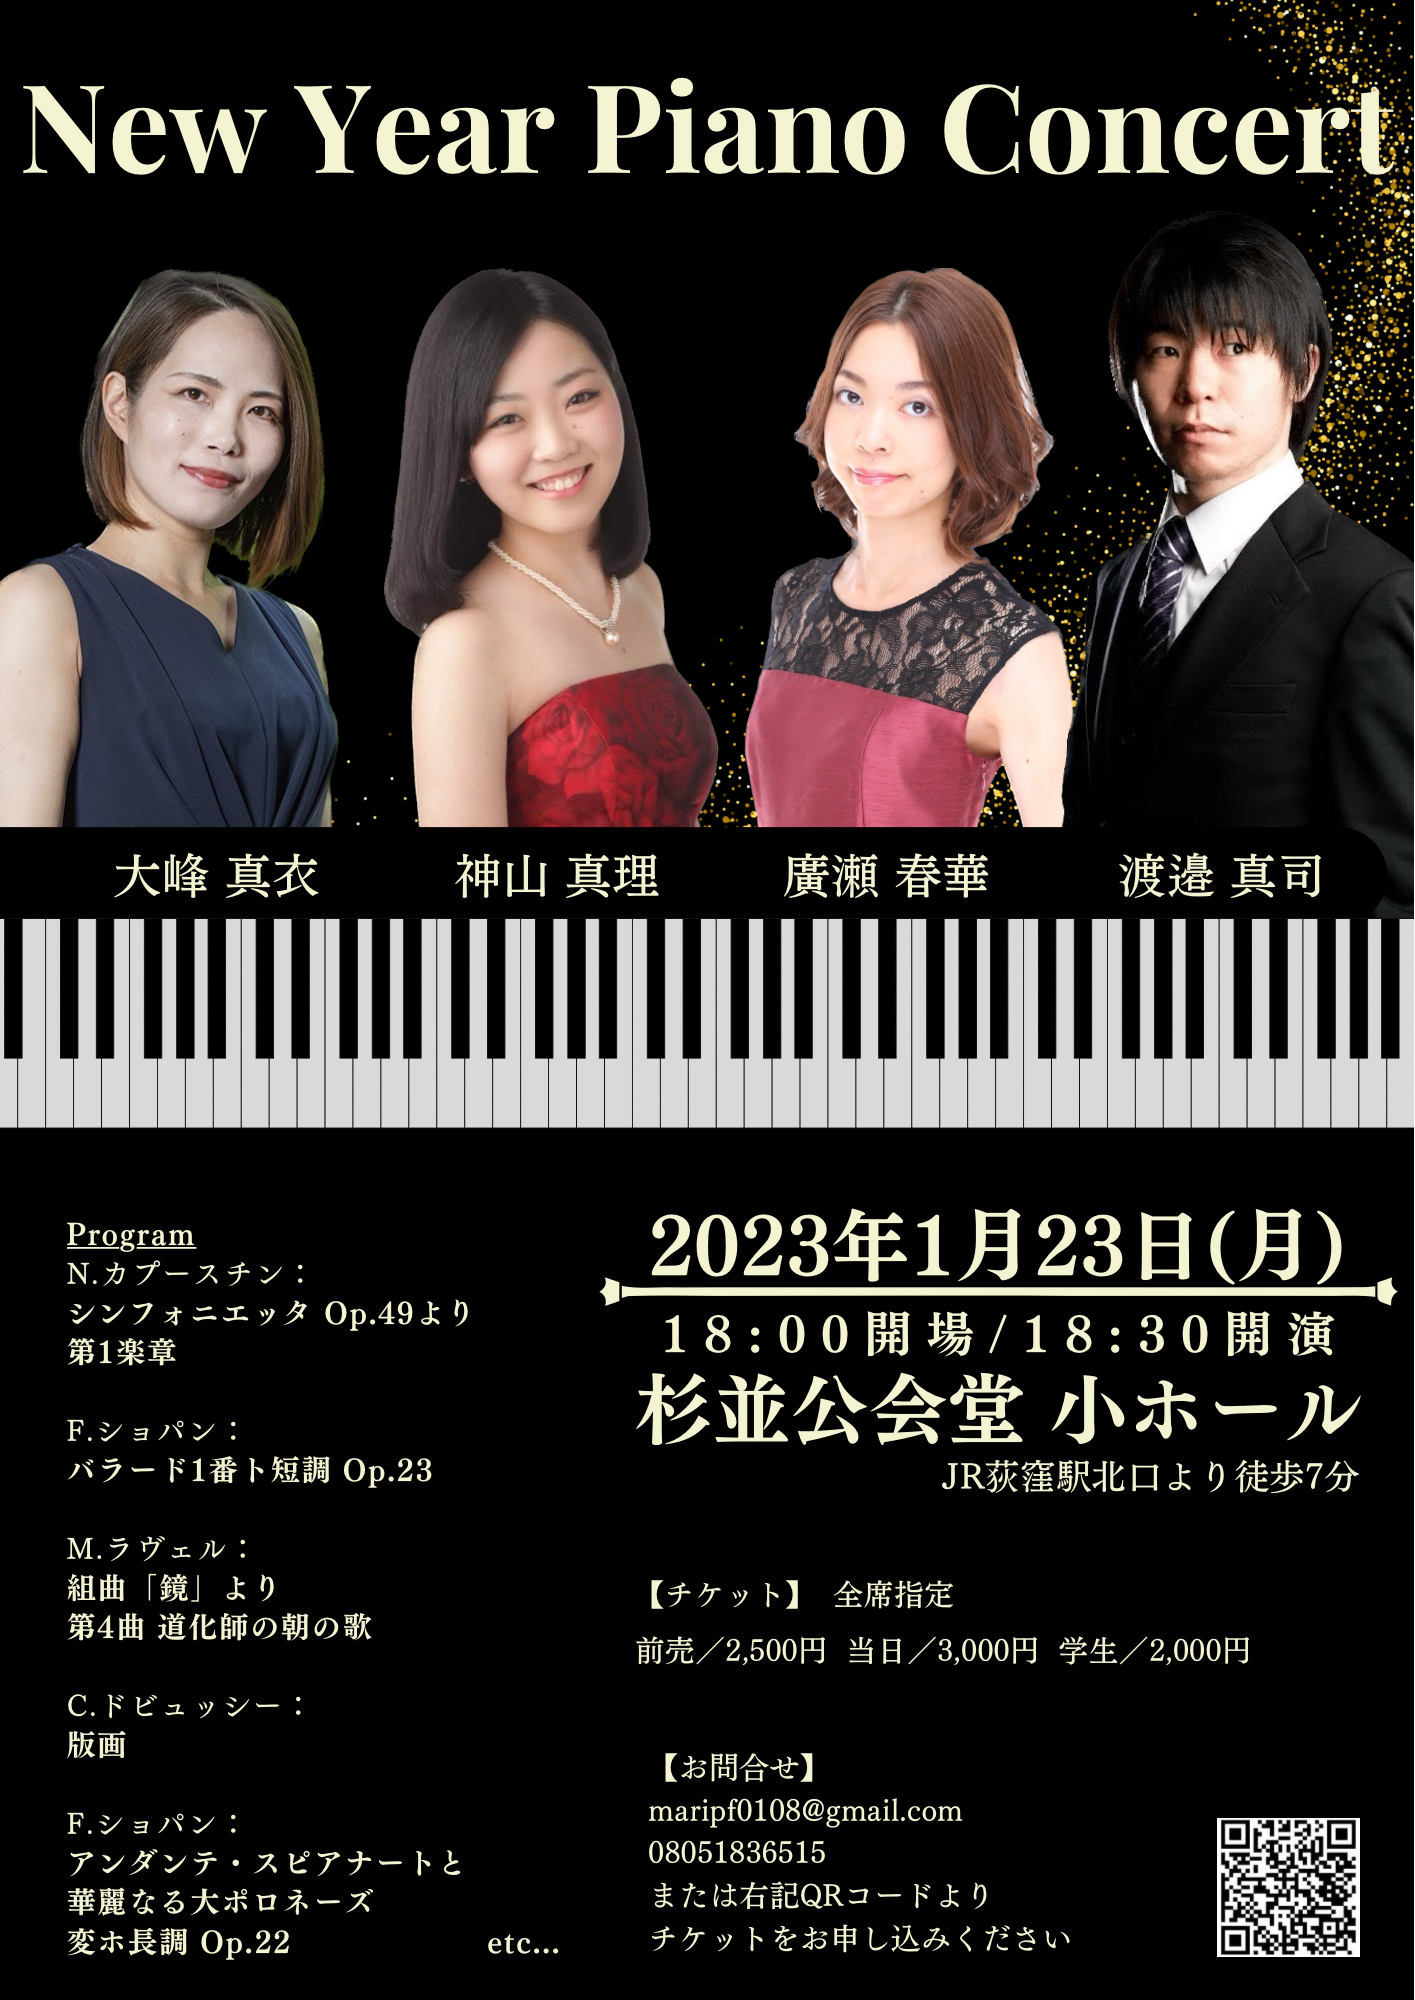 New Year Piano Concert